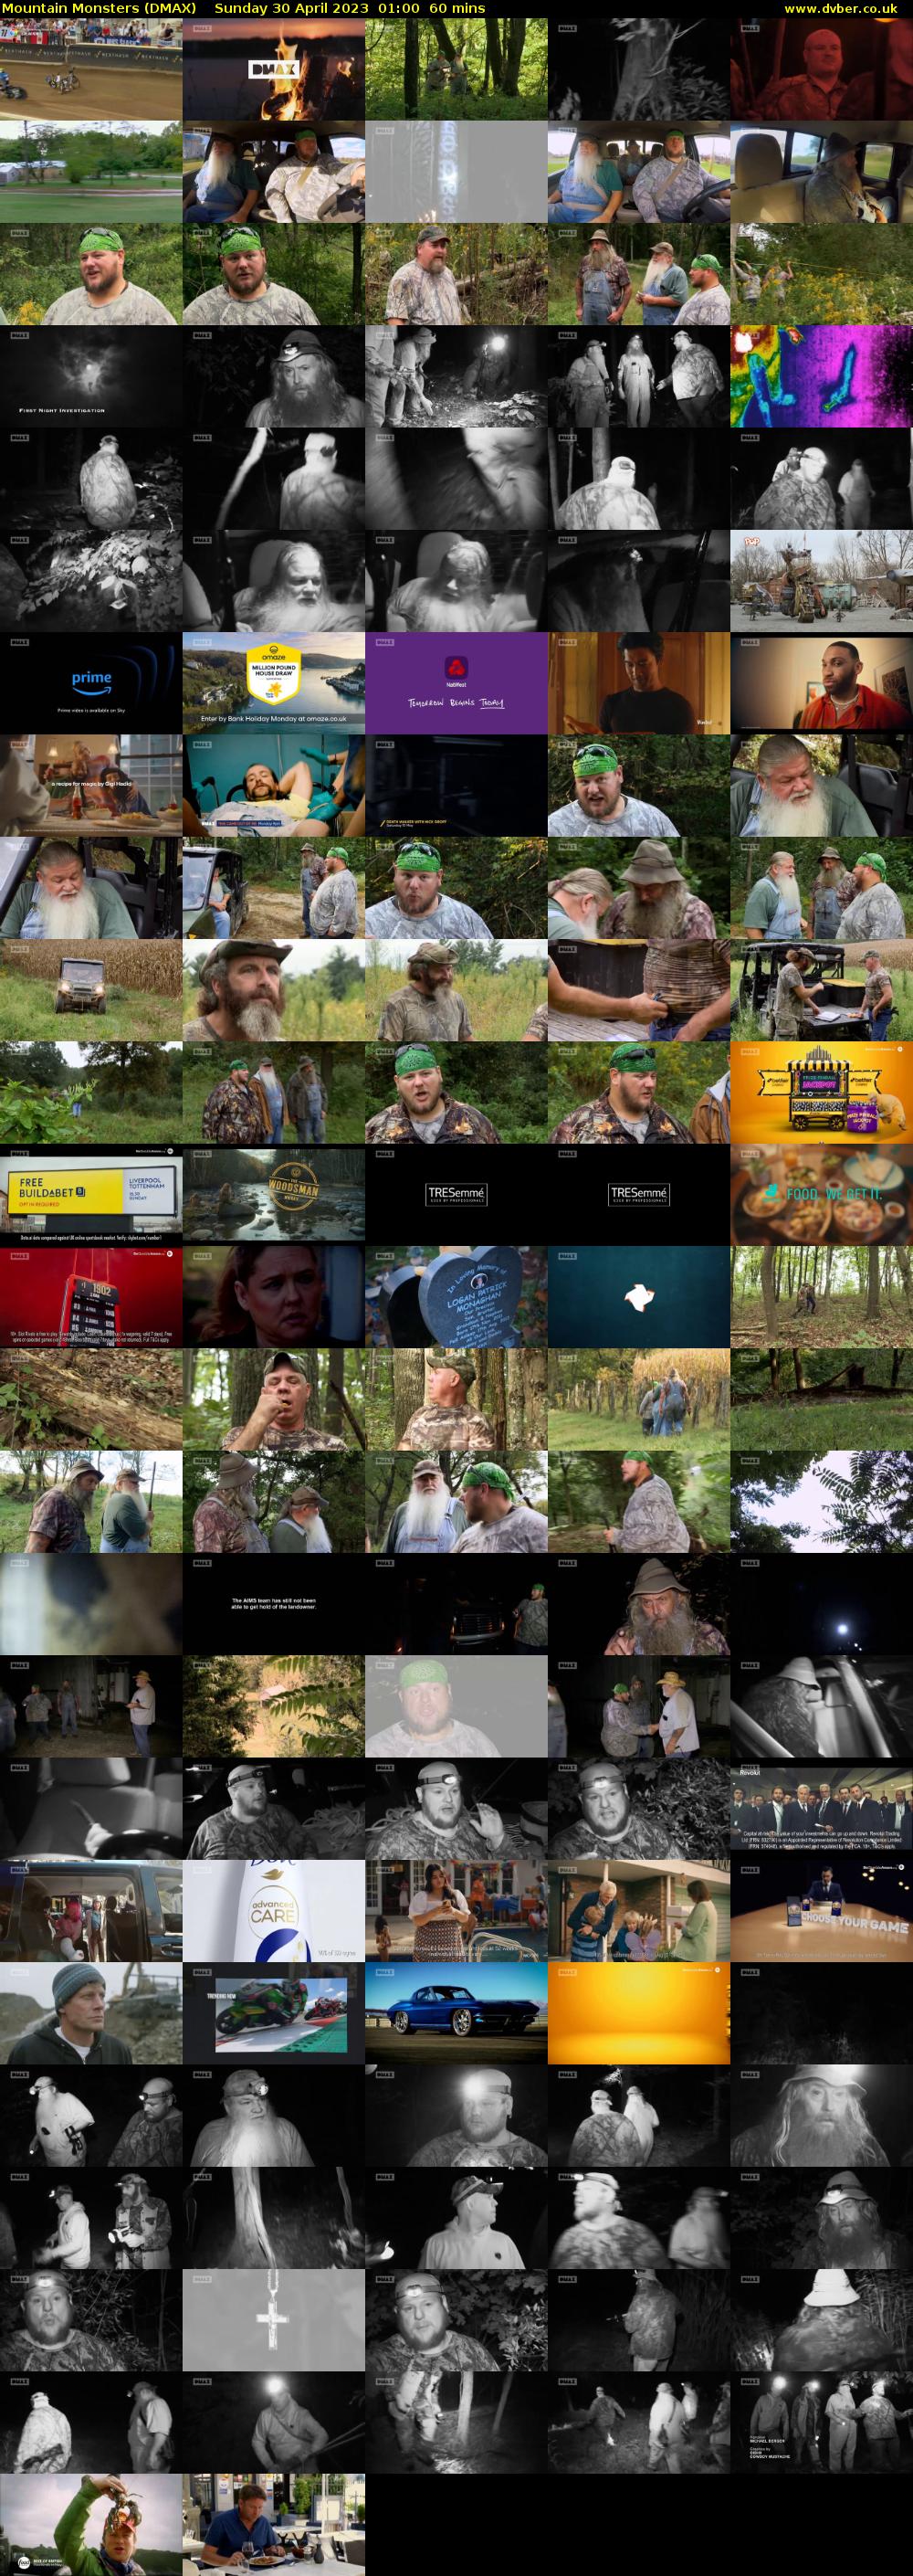 Mountain Monsters (DMAX) Sunday 30 April 2023 01:00 - 02:00